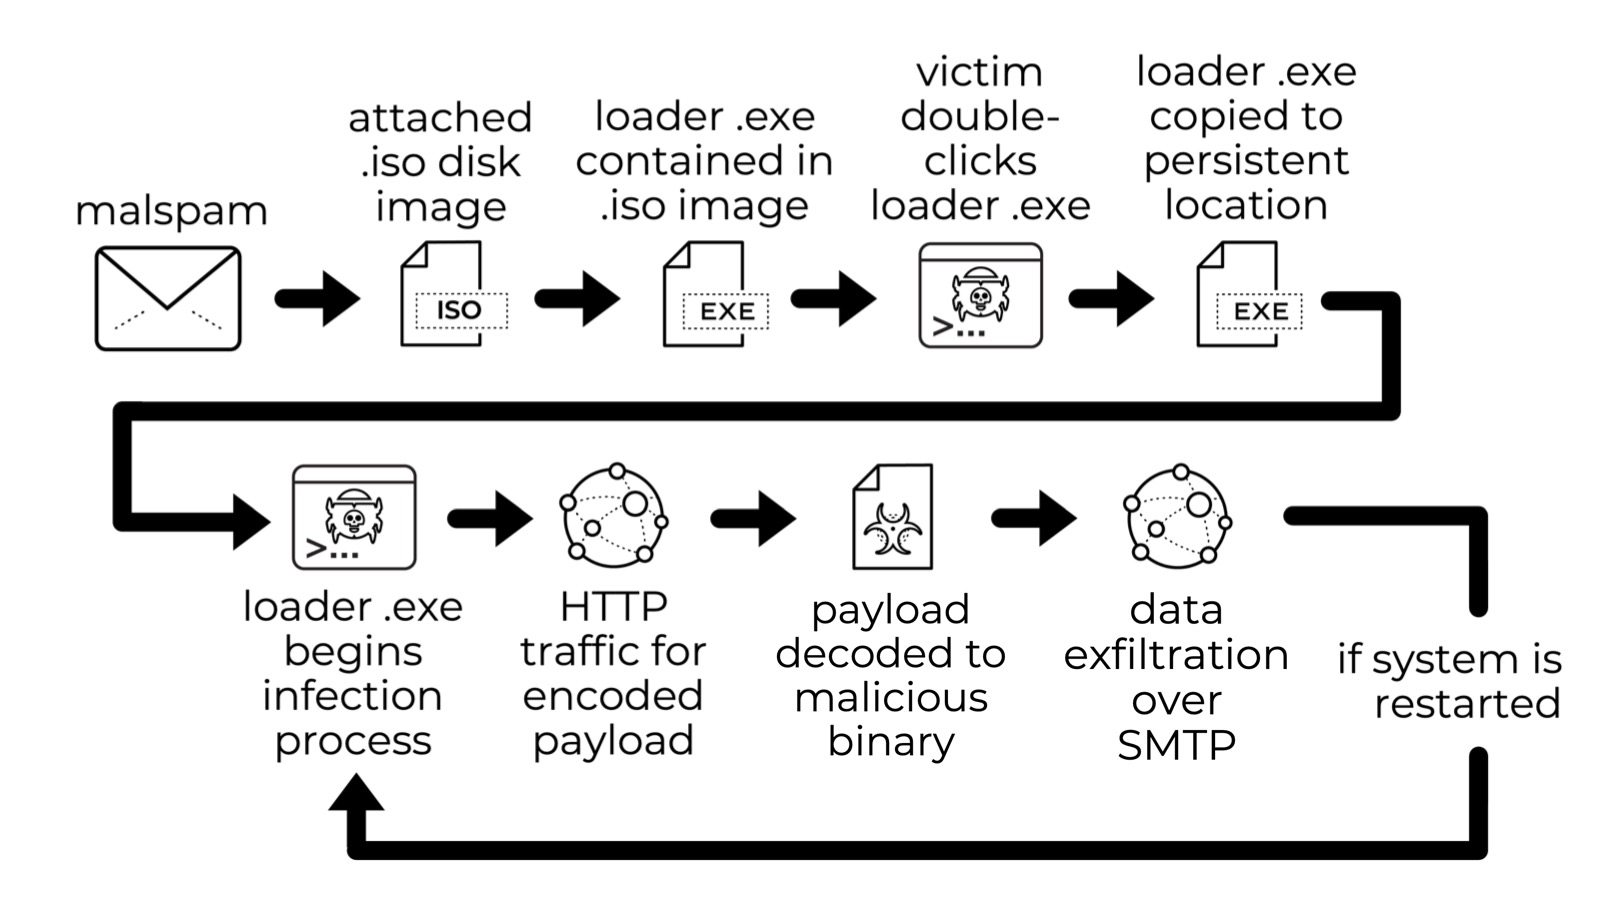 Image 1 is a flow chart showing the Agent Tesla variant infection, starting with malspam. It shows the circuitous route the loader.exe takes depending on the victim’s actions. 